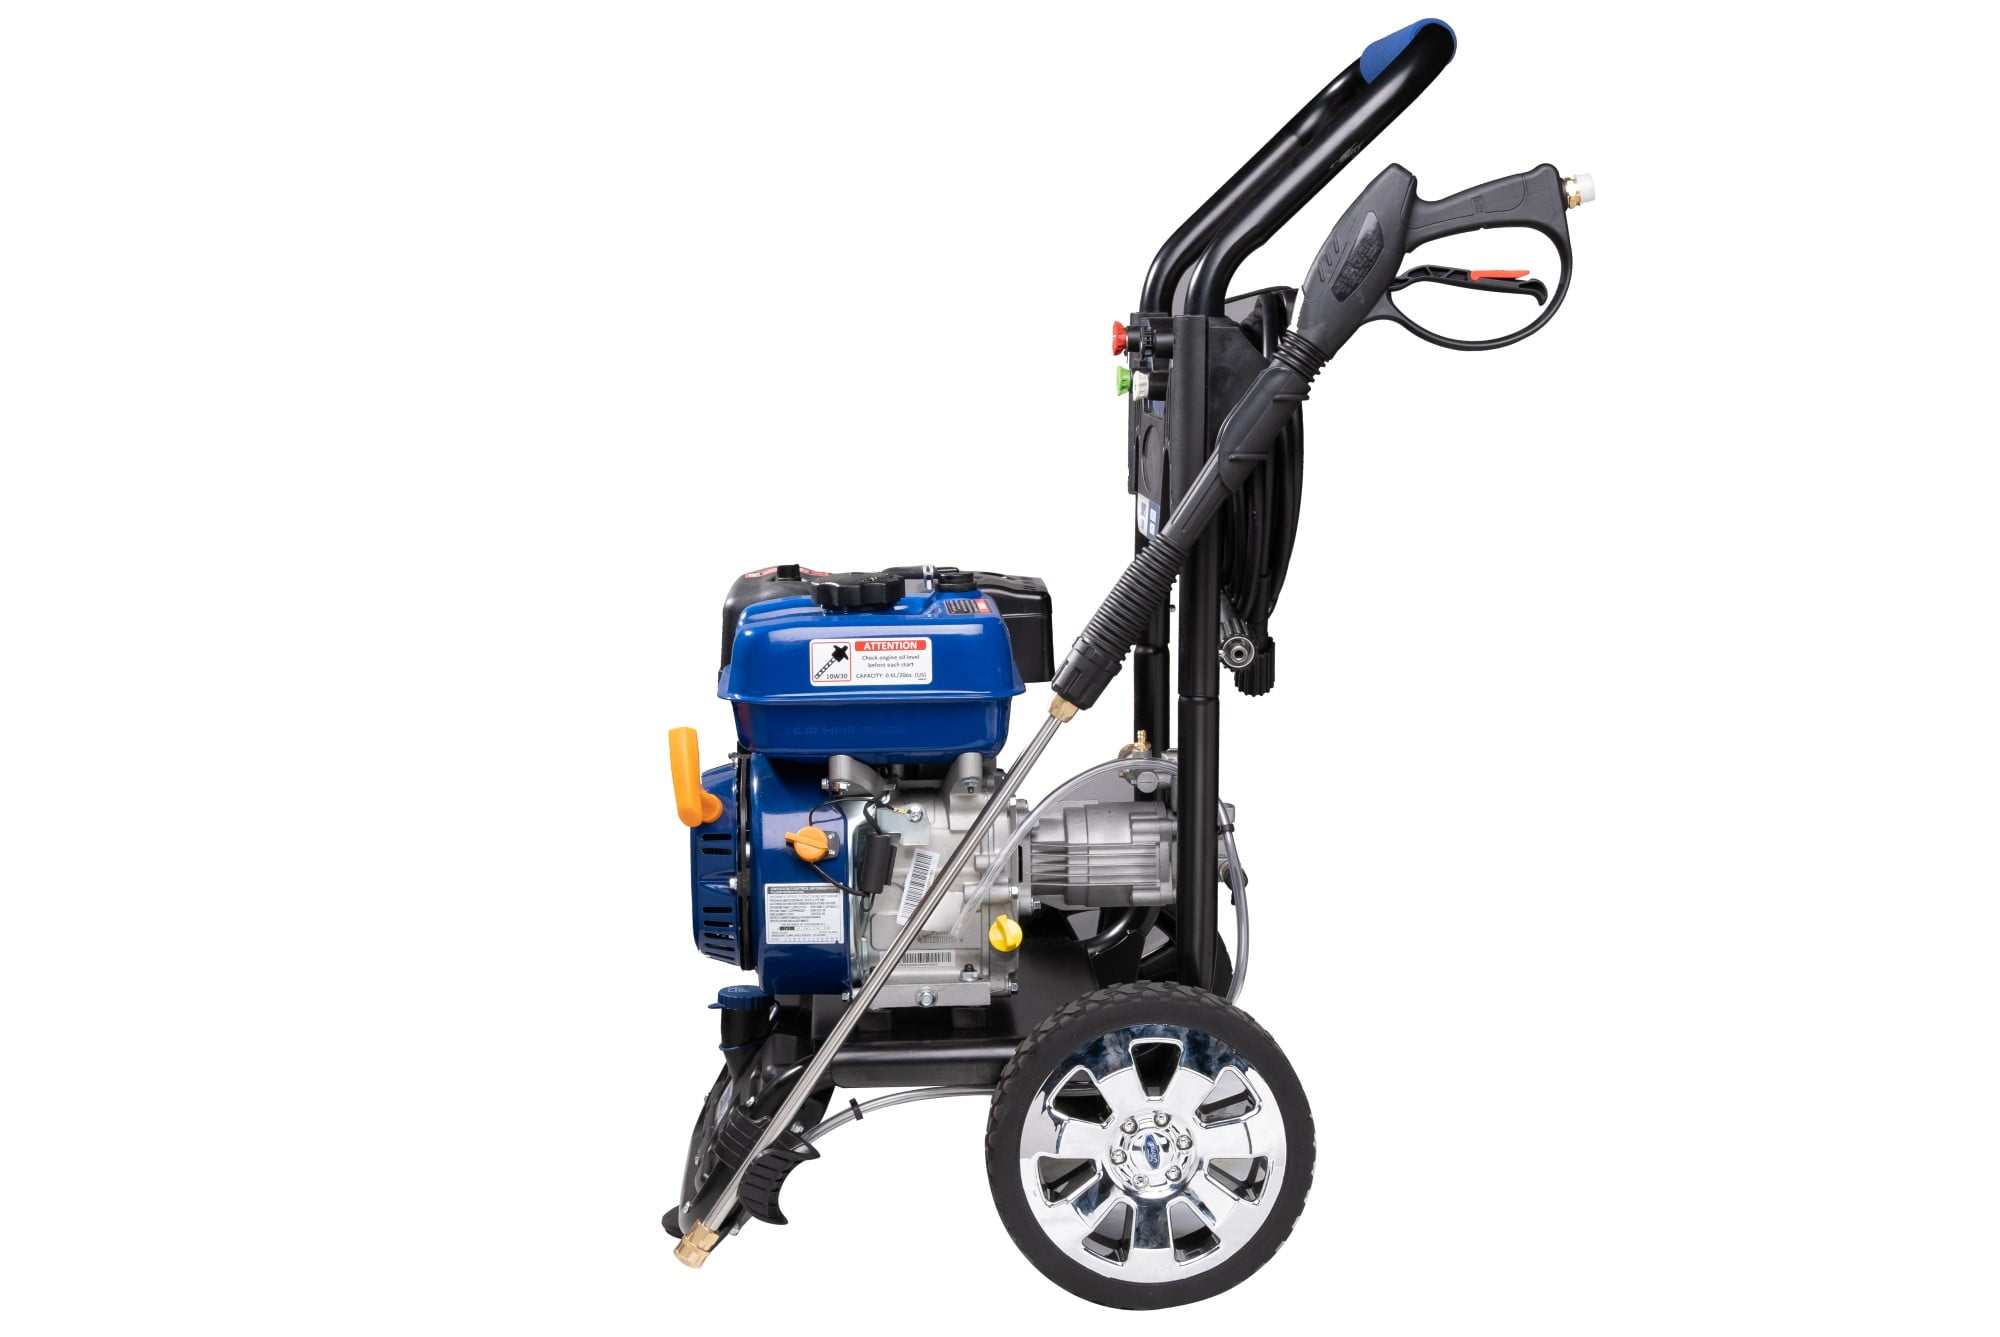 Ford FPWG2900H Gas Powered Pressure Washer - 2900 PSI and 2.5 GPM - CARB Compliant - 3